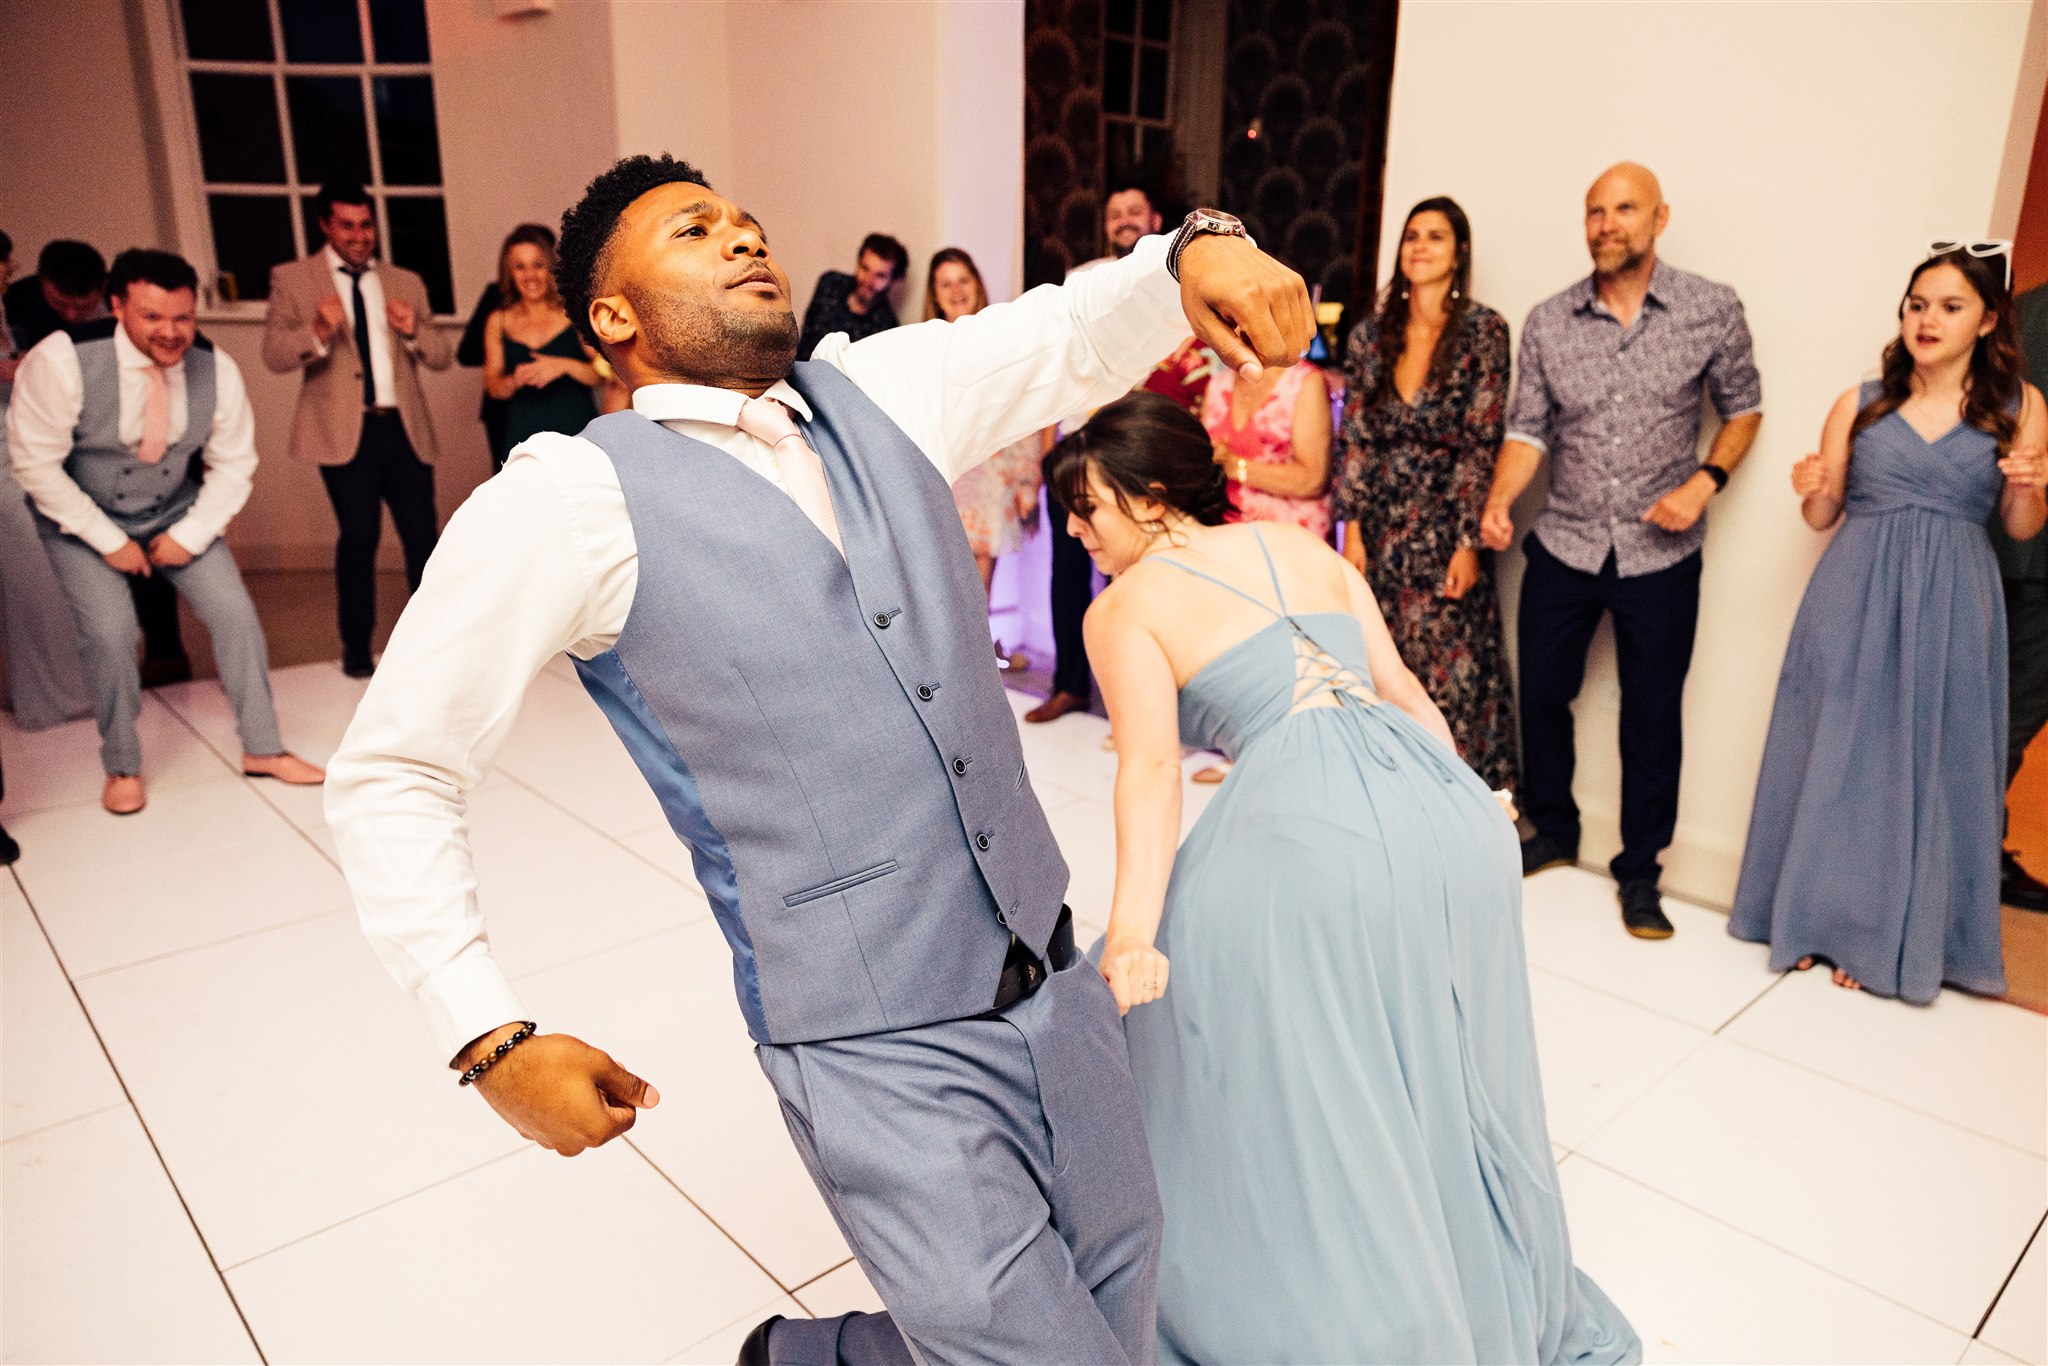 A man with a blue three piece suit and pink tie and a cream shirt is caught in a crazy dance move on the dance floor whilst other wedding guests look on.